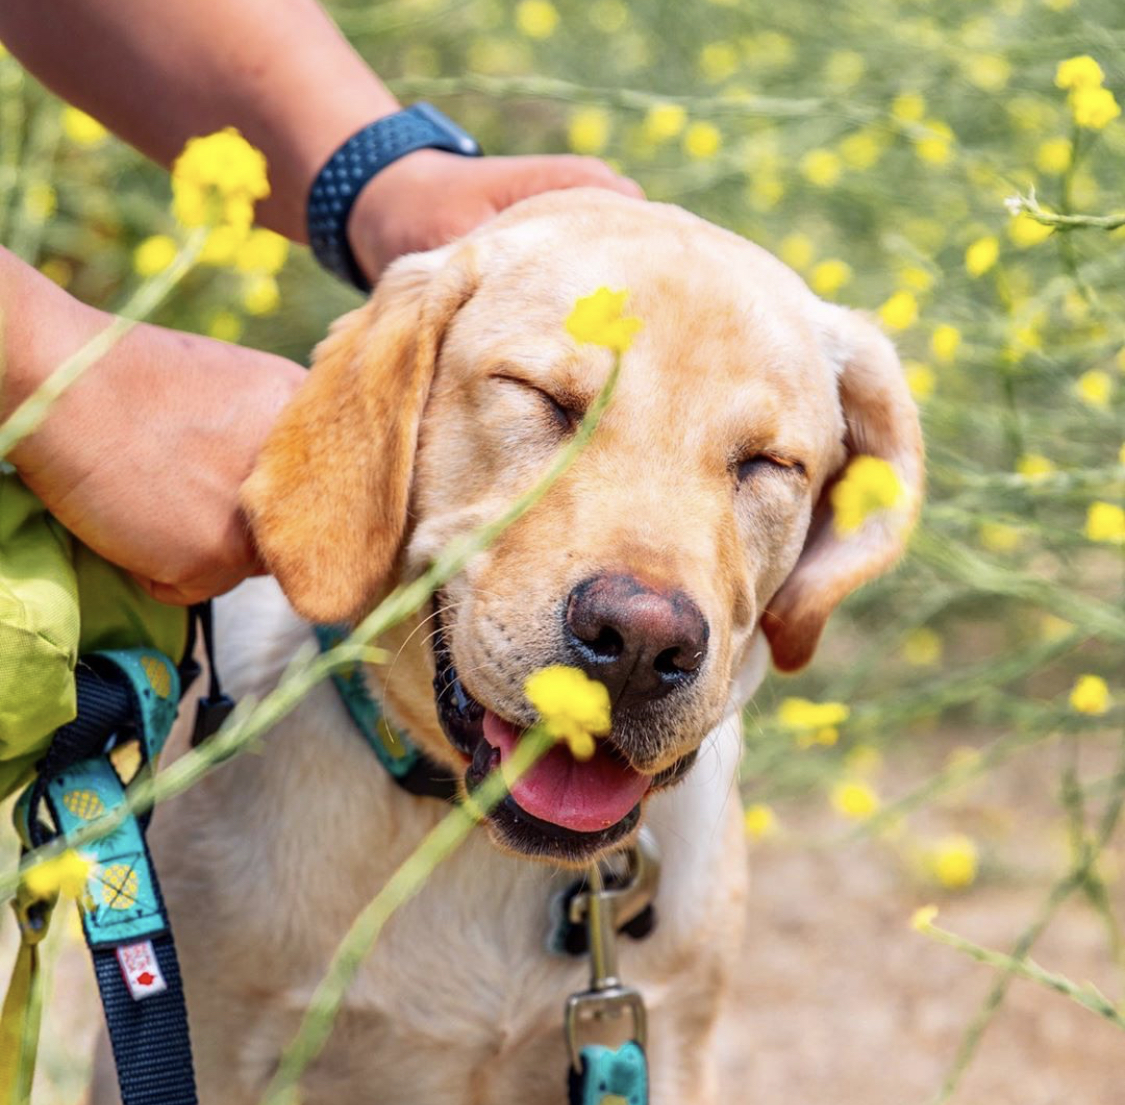 A Labrador Retriever in the filed of yellow flowers with a man fixing is collar from behind